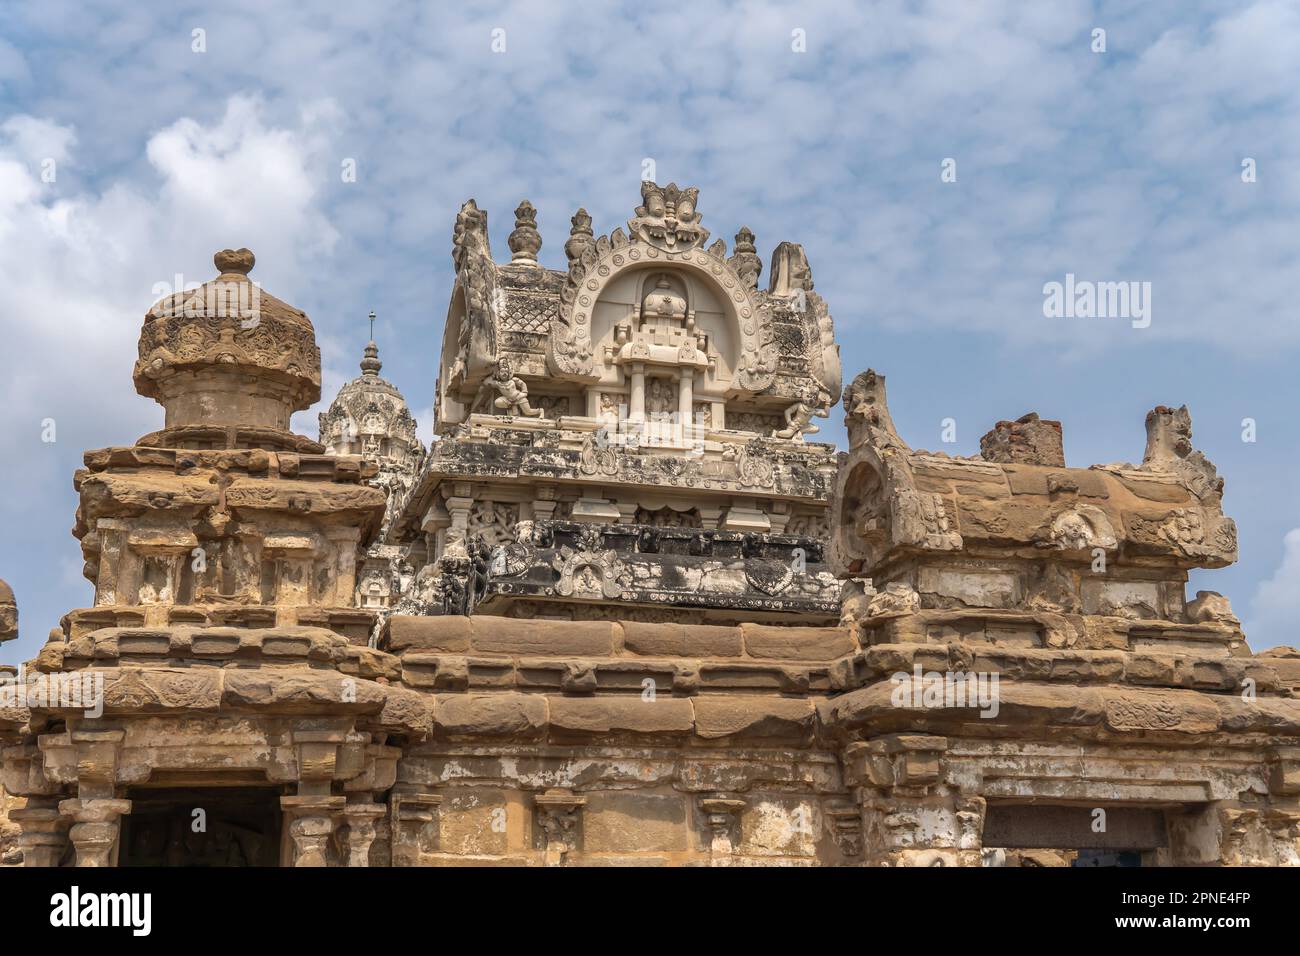 One of the gopuram view from in between two ruined structure. Contracting what is perfect and ruined in the Kailasanathar temple located in kanchipura Stock Photo